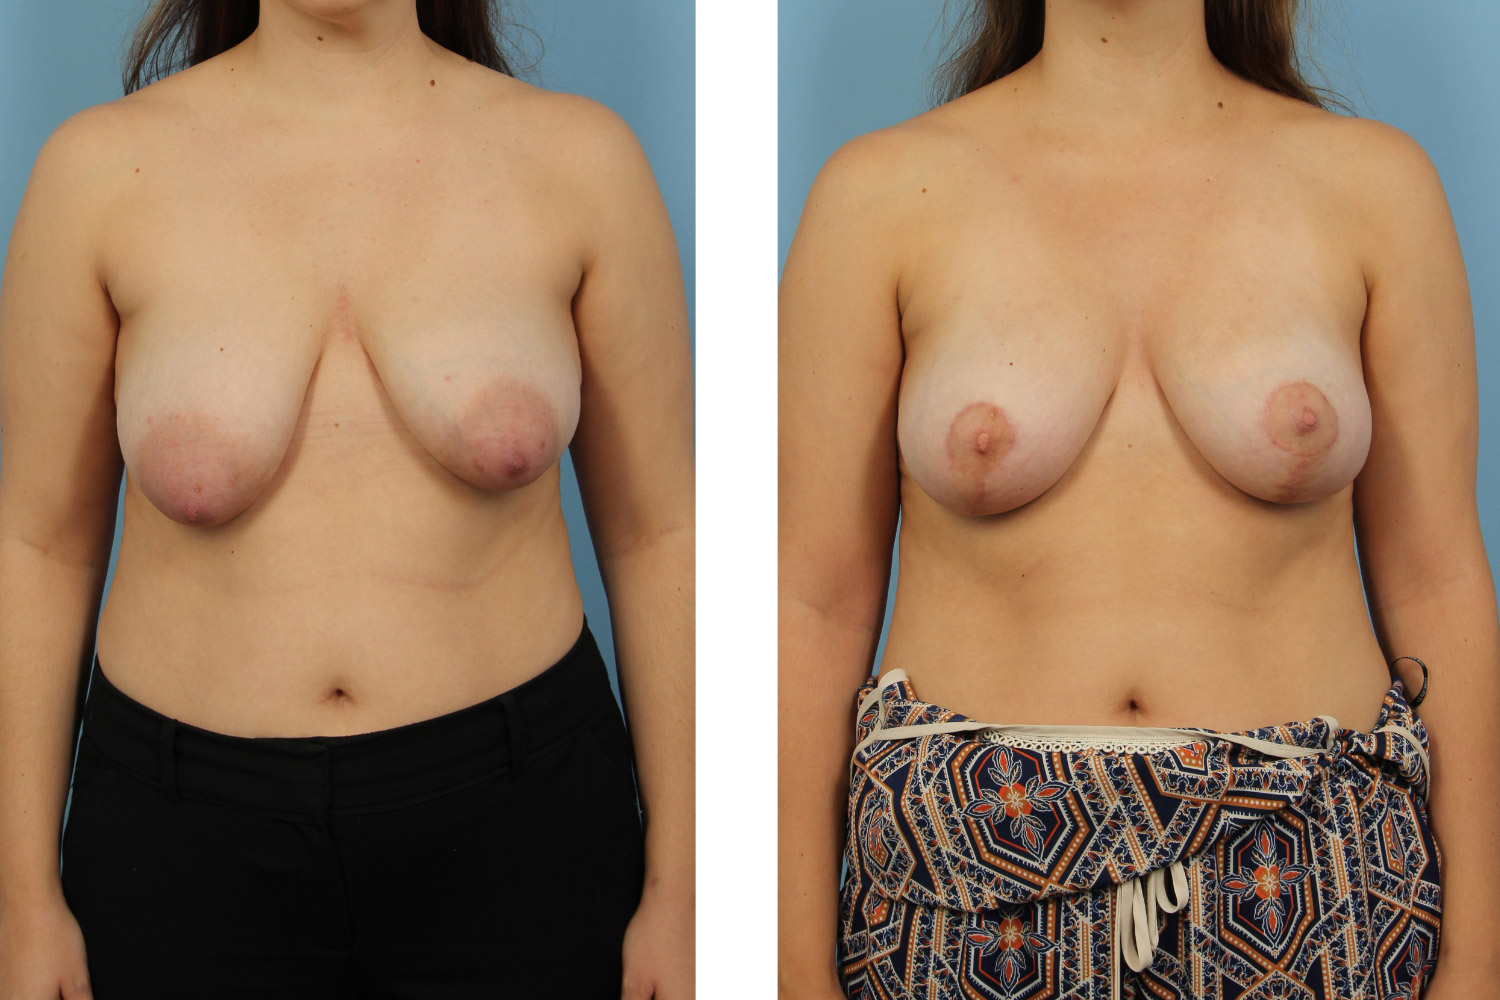 Breast lift with adjacent liposuction and fat transfer with breast reduction on a 30-year-old woman